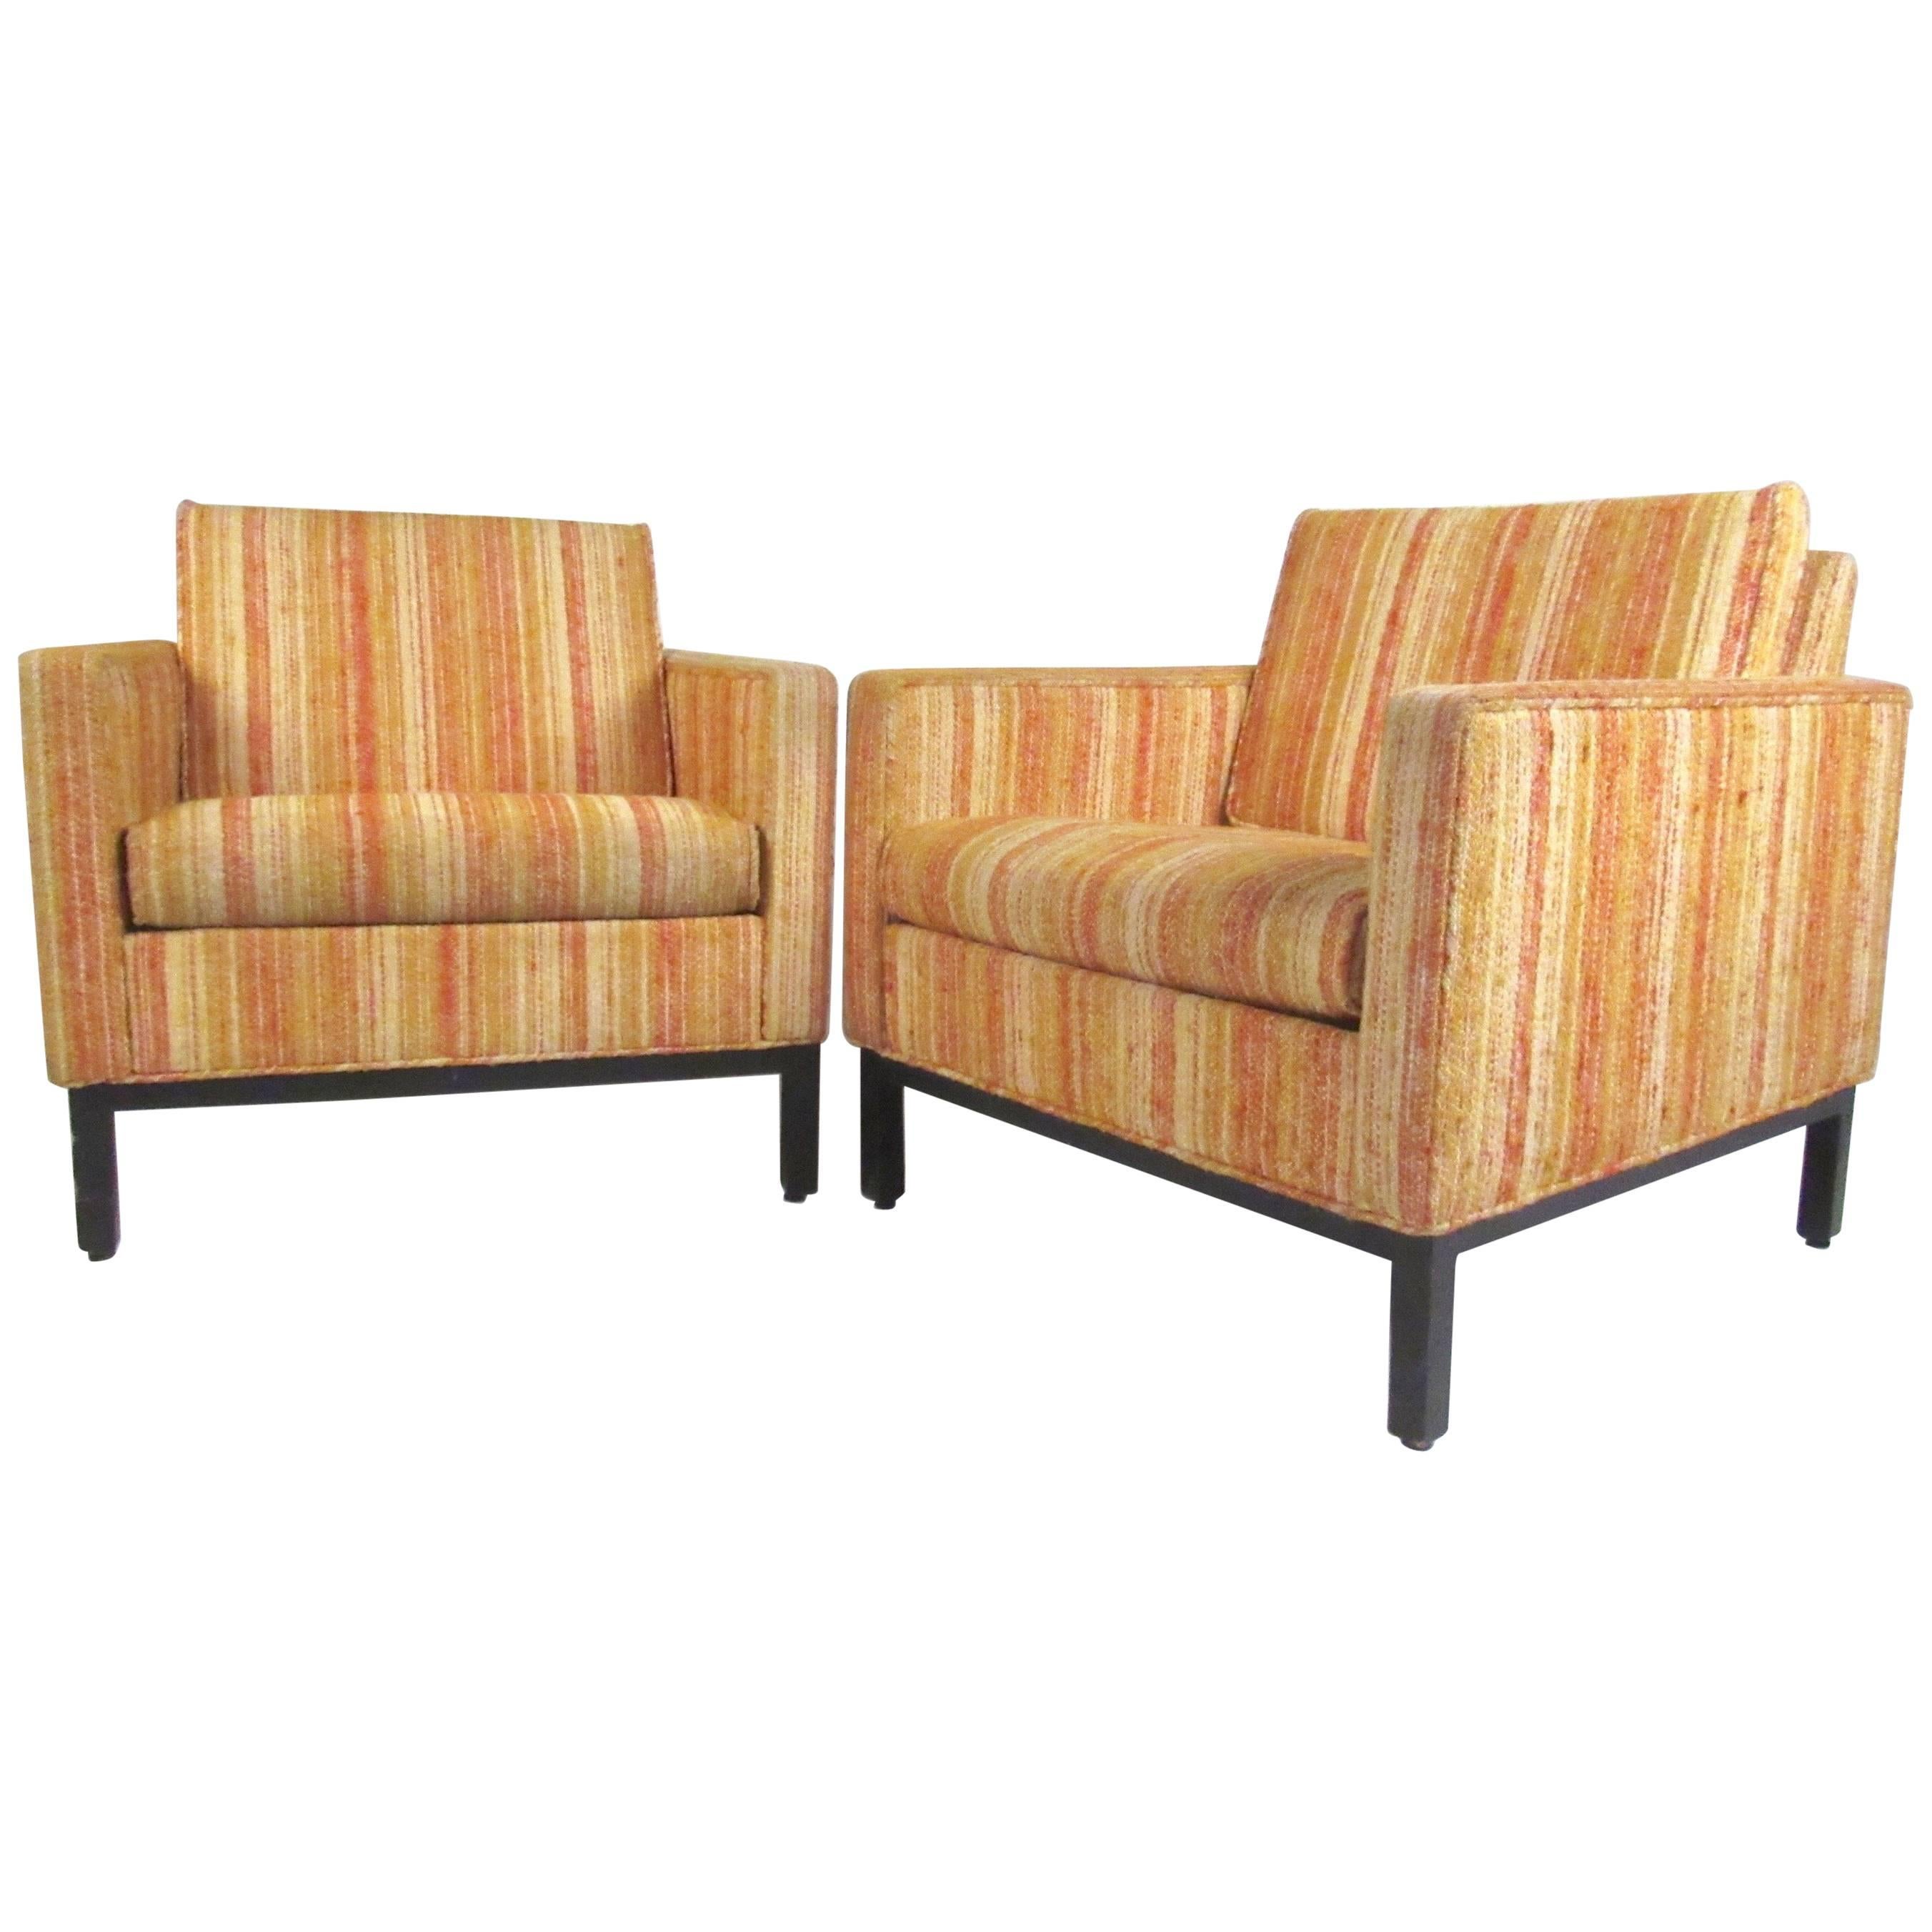 Pair of Vintage Modern Club Chairs with Kravet Upholstery For Sale